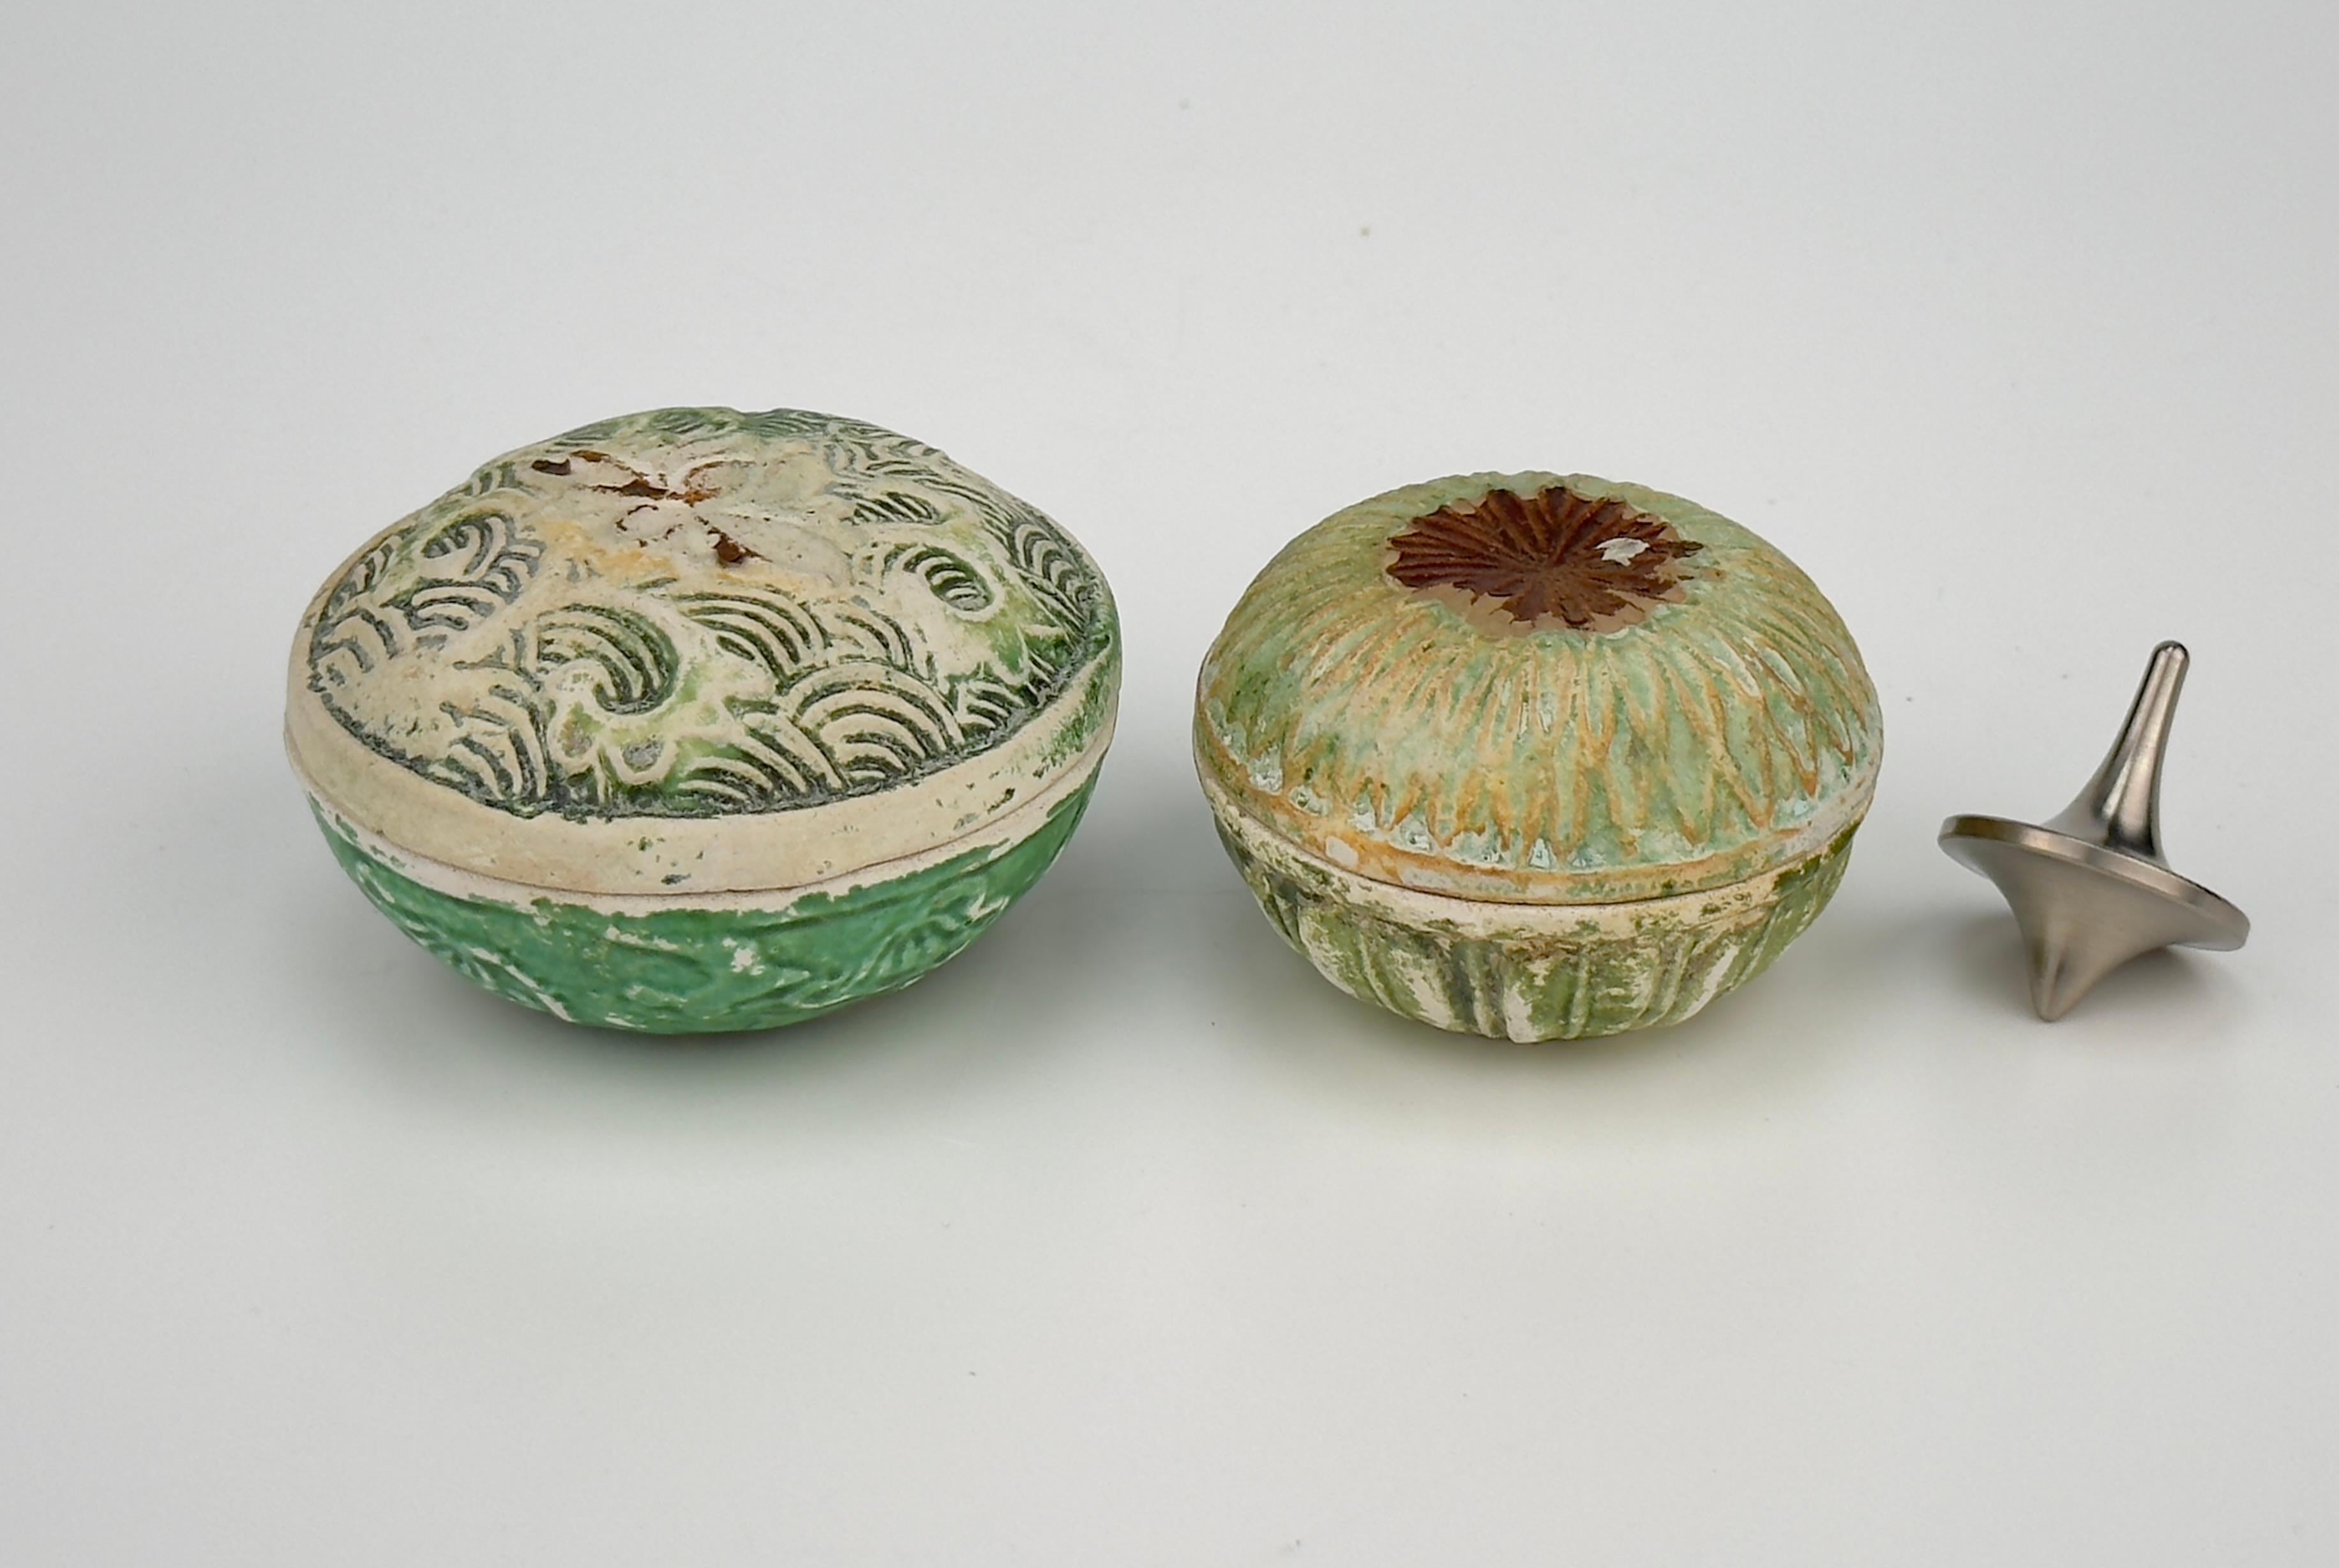 Glazed Swatow Lidded Boxes in the shape of Waves and Flowers, Late Ming Era(16-17th c) For Sale